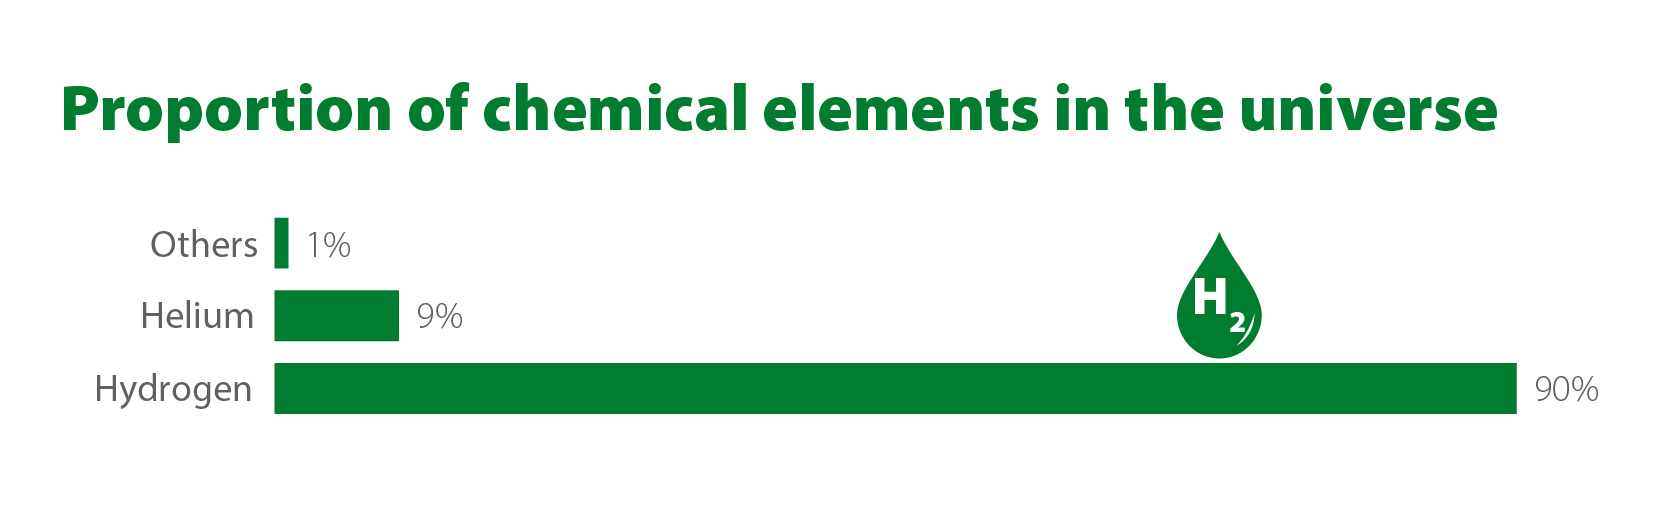 Proportion of chemical elements in the universe